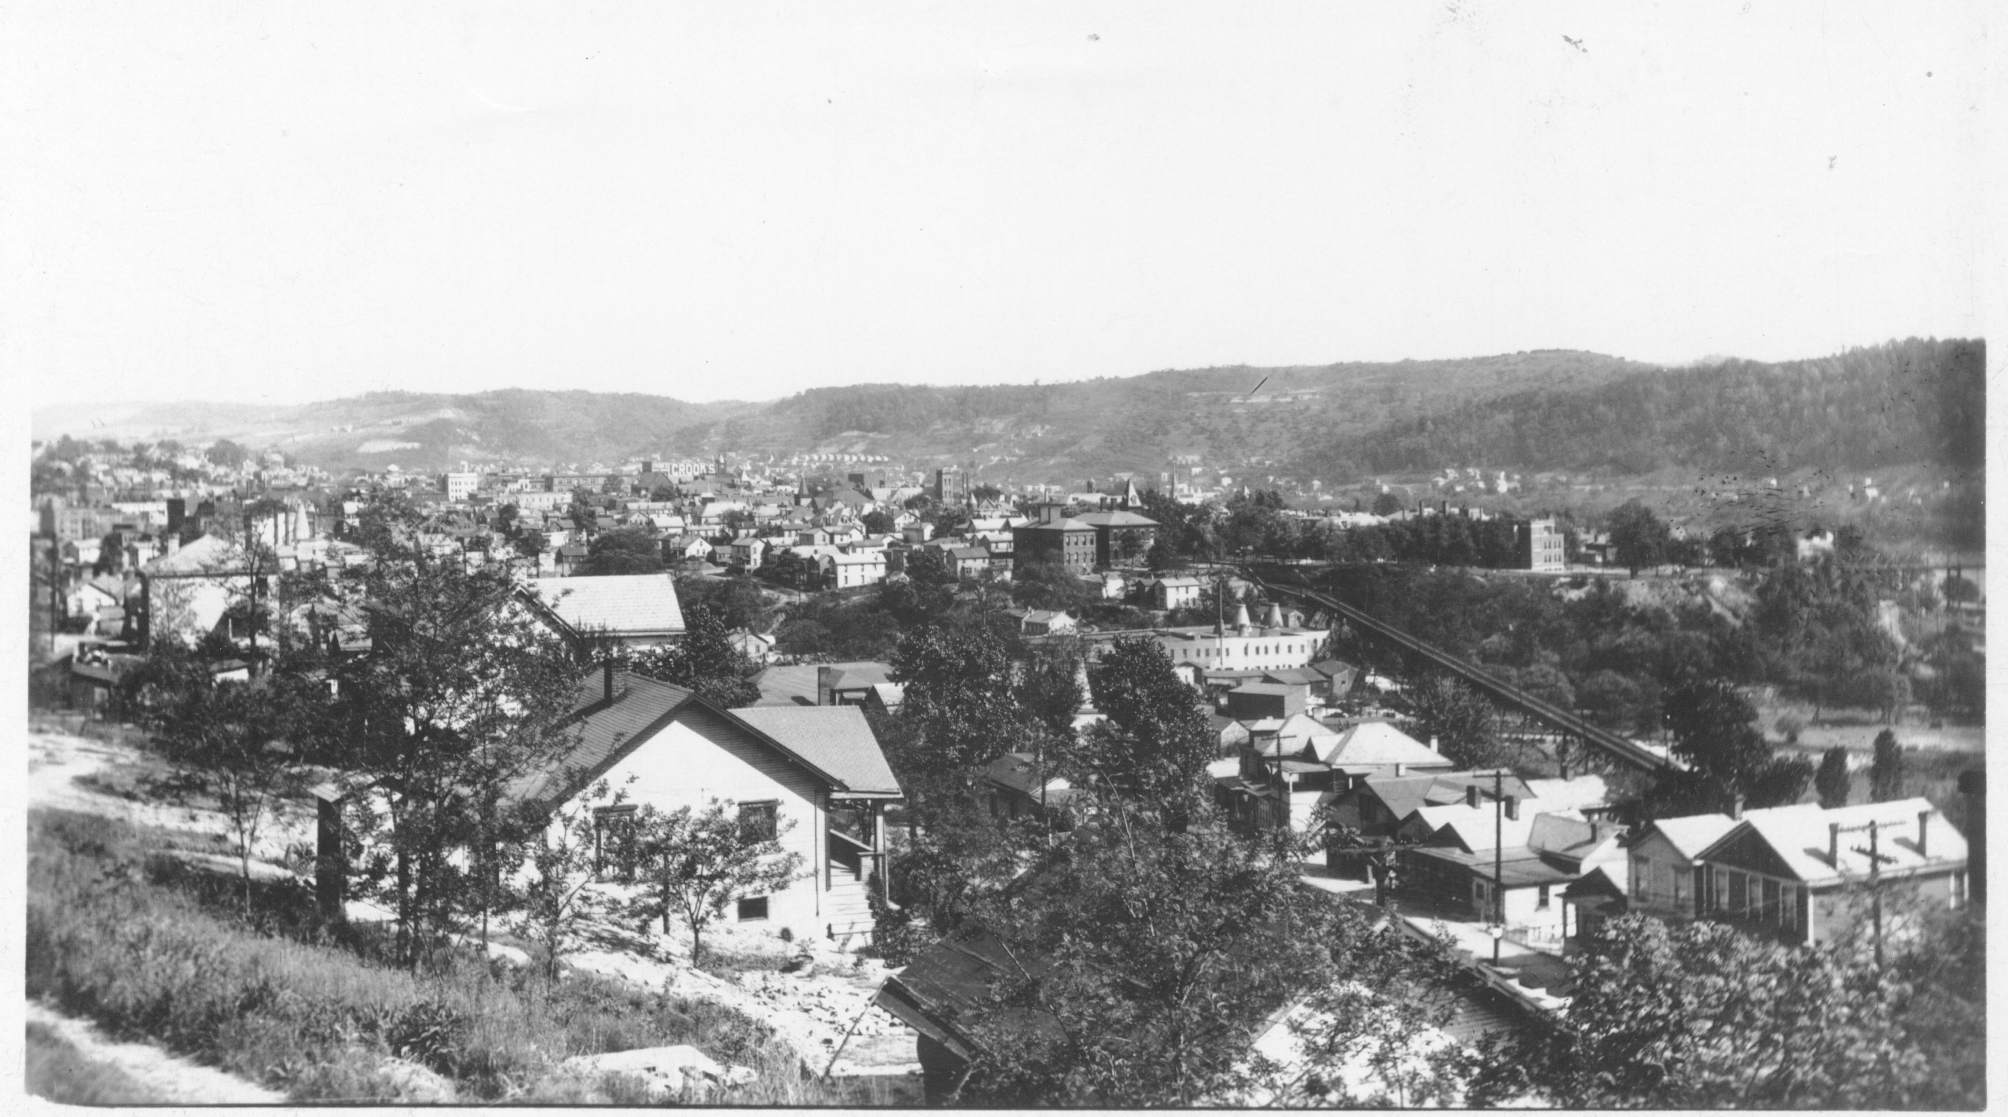 West End between 1907 and 1939 